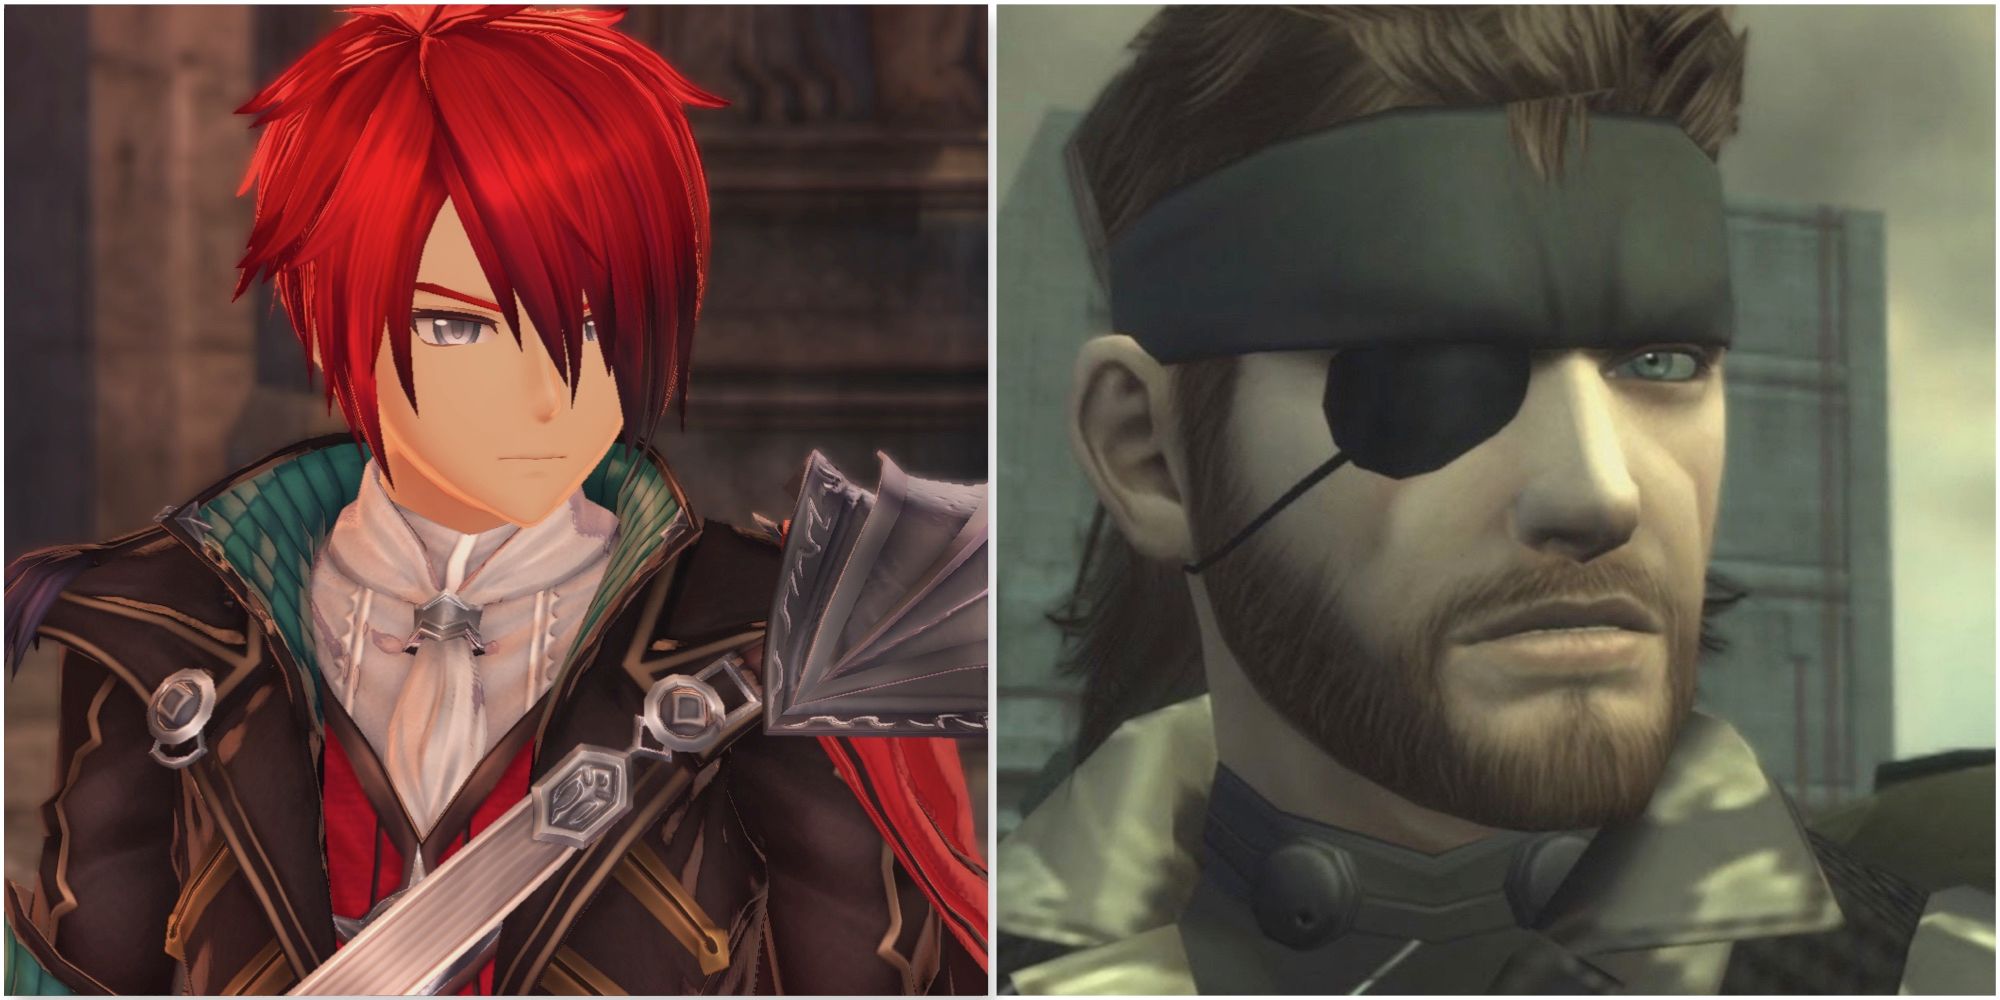 Adol in Ys 9 and Big Boss in Metal Gear Solid 3